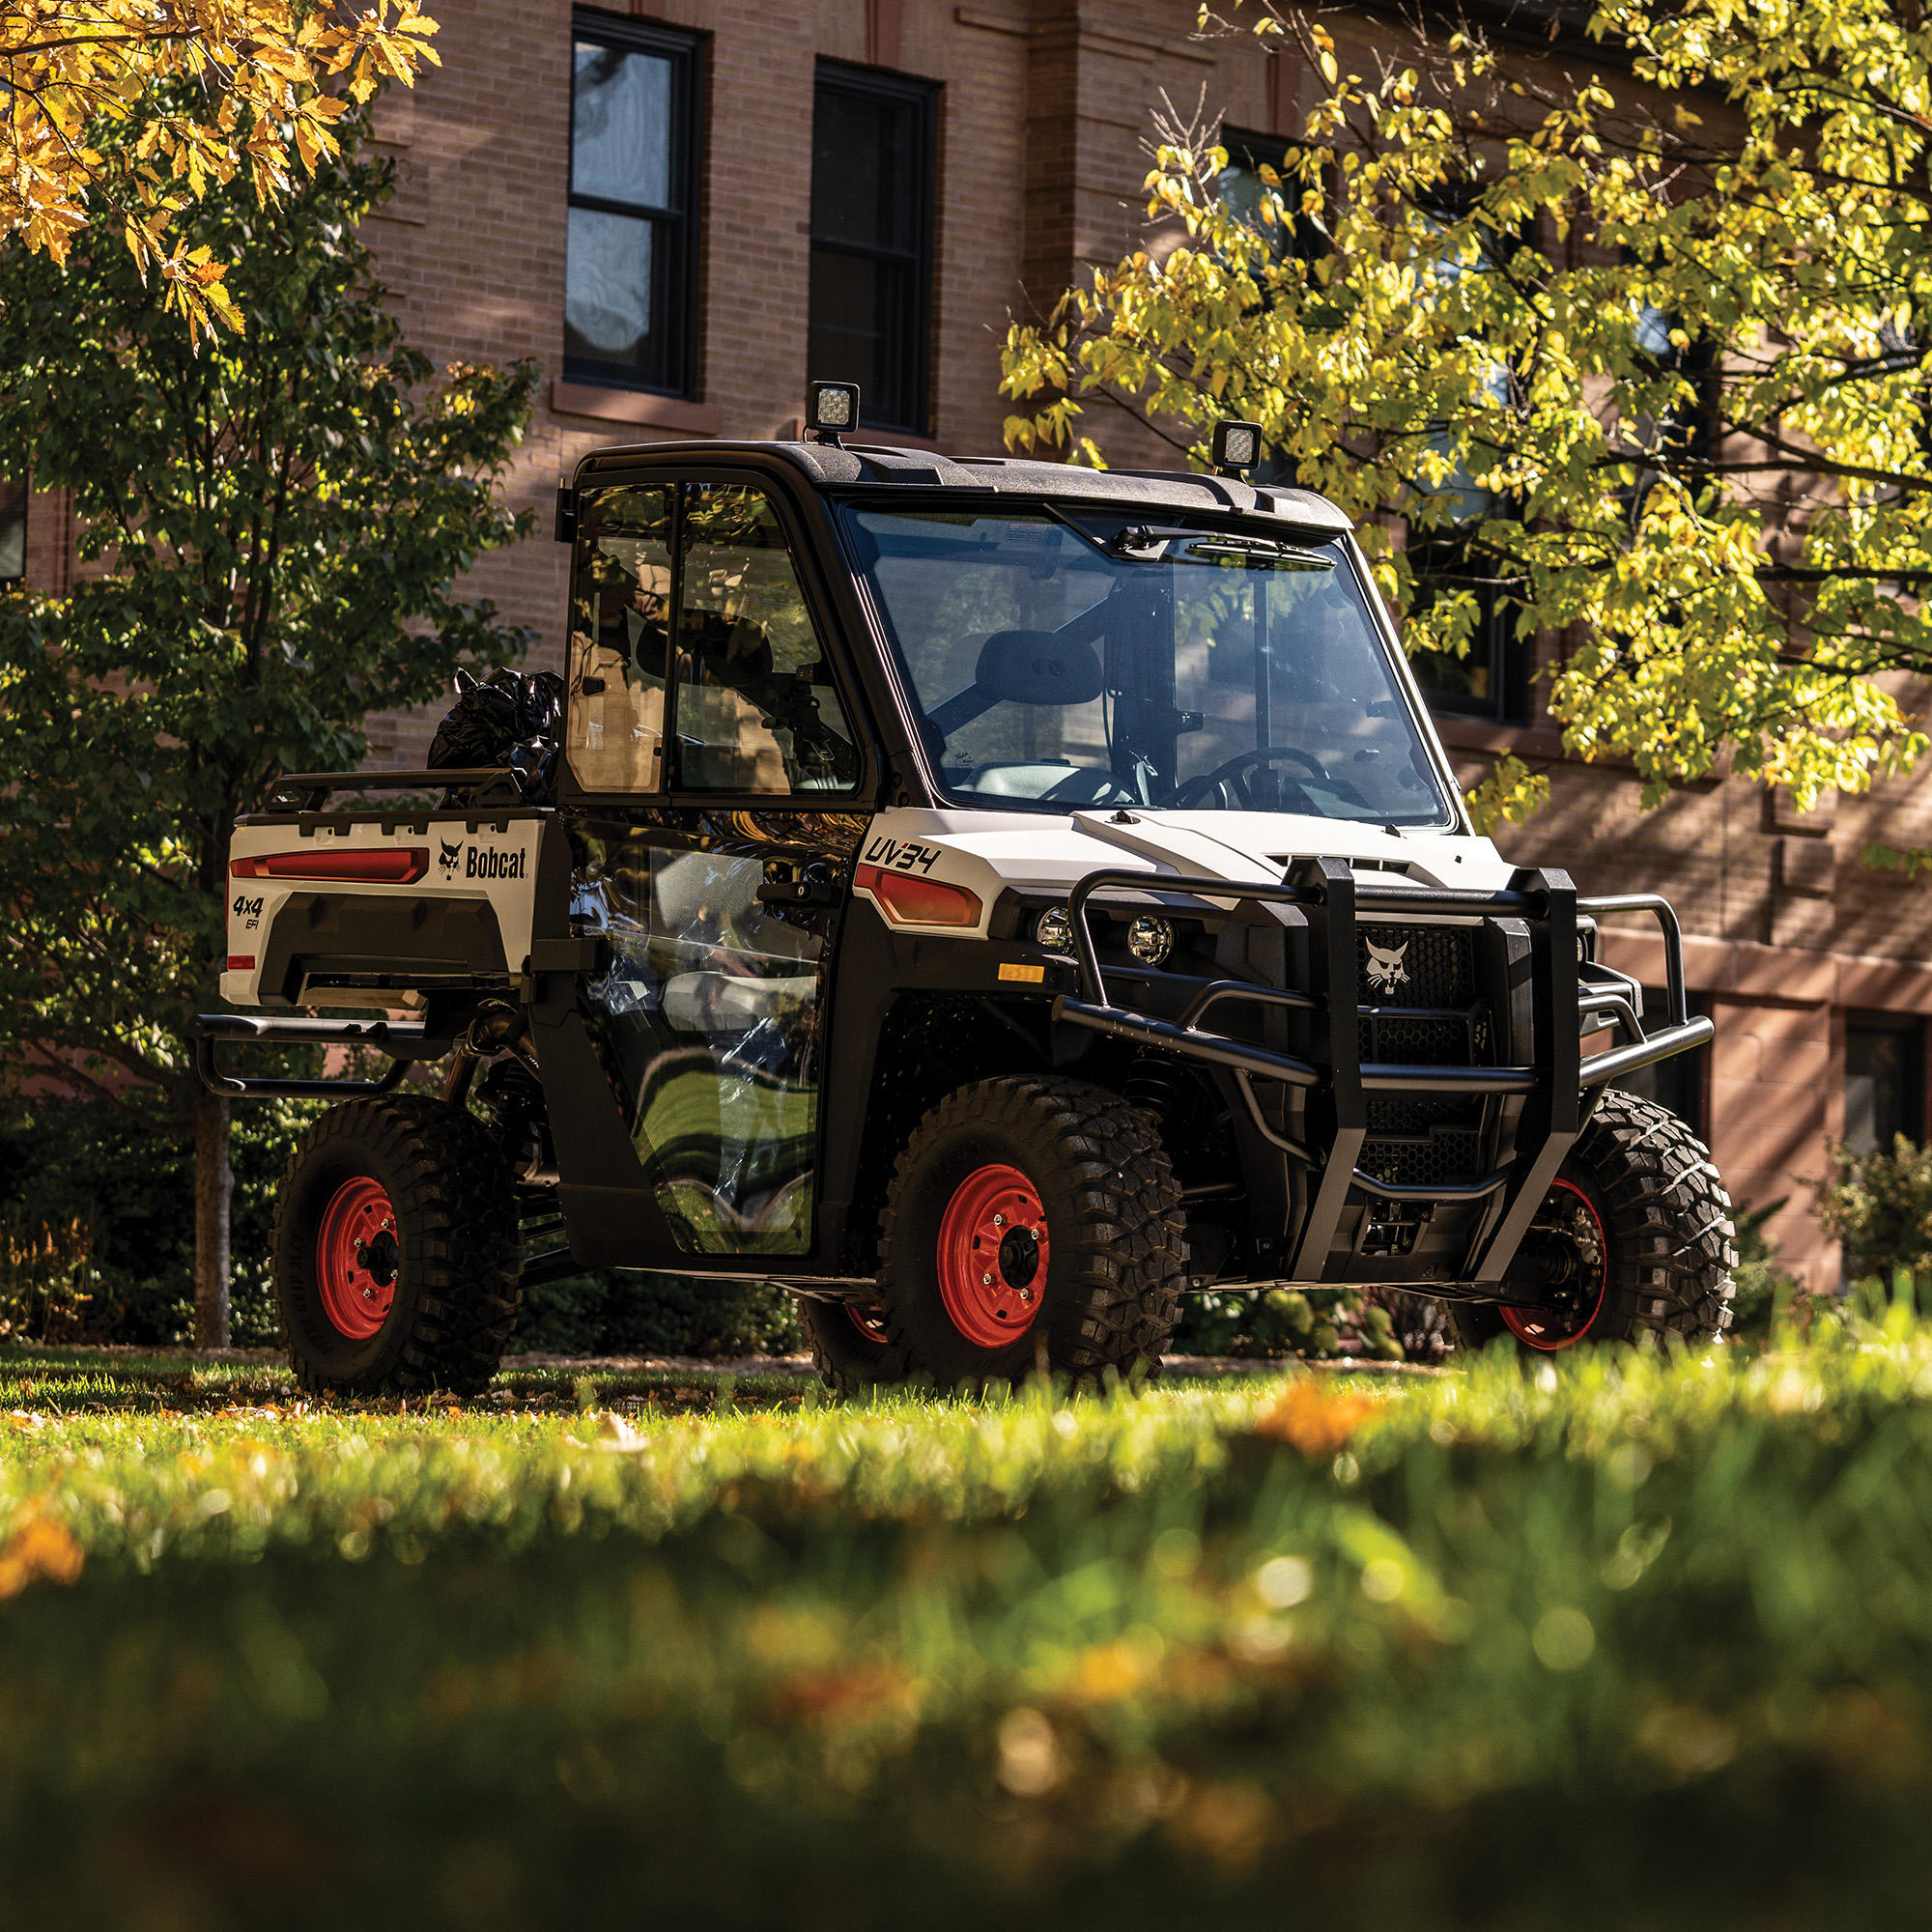 A Bobcat UV34 utility vehicle Bobcat of Fort McMurray Fort Mcmurray (780)714-9200